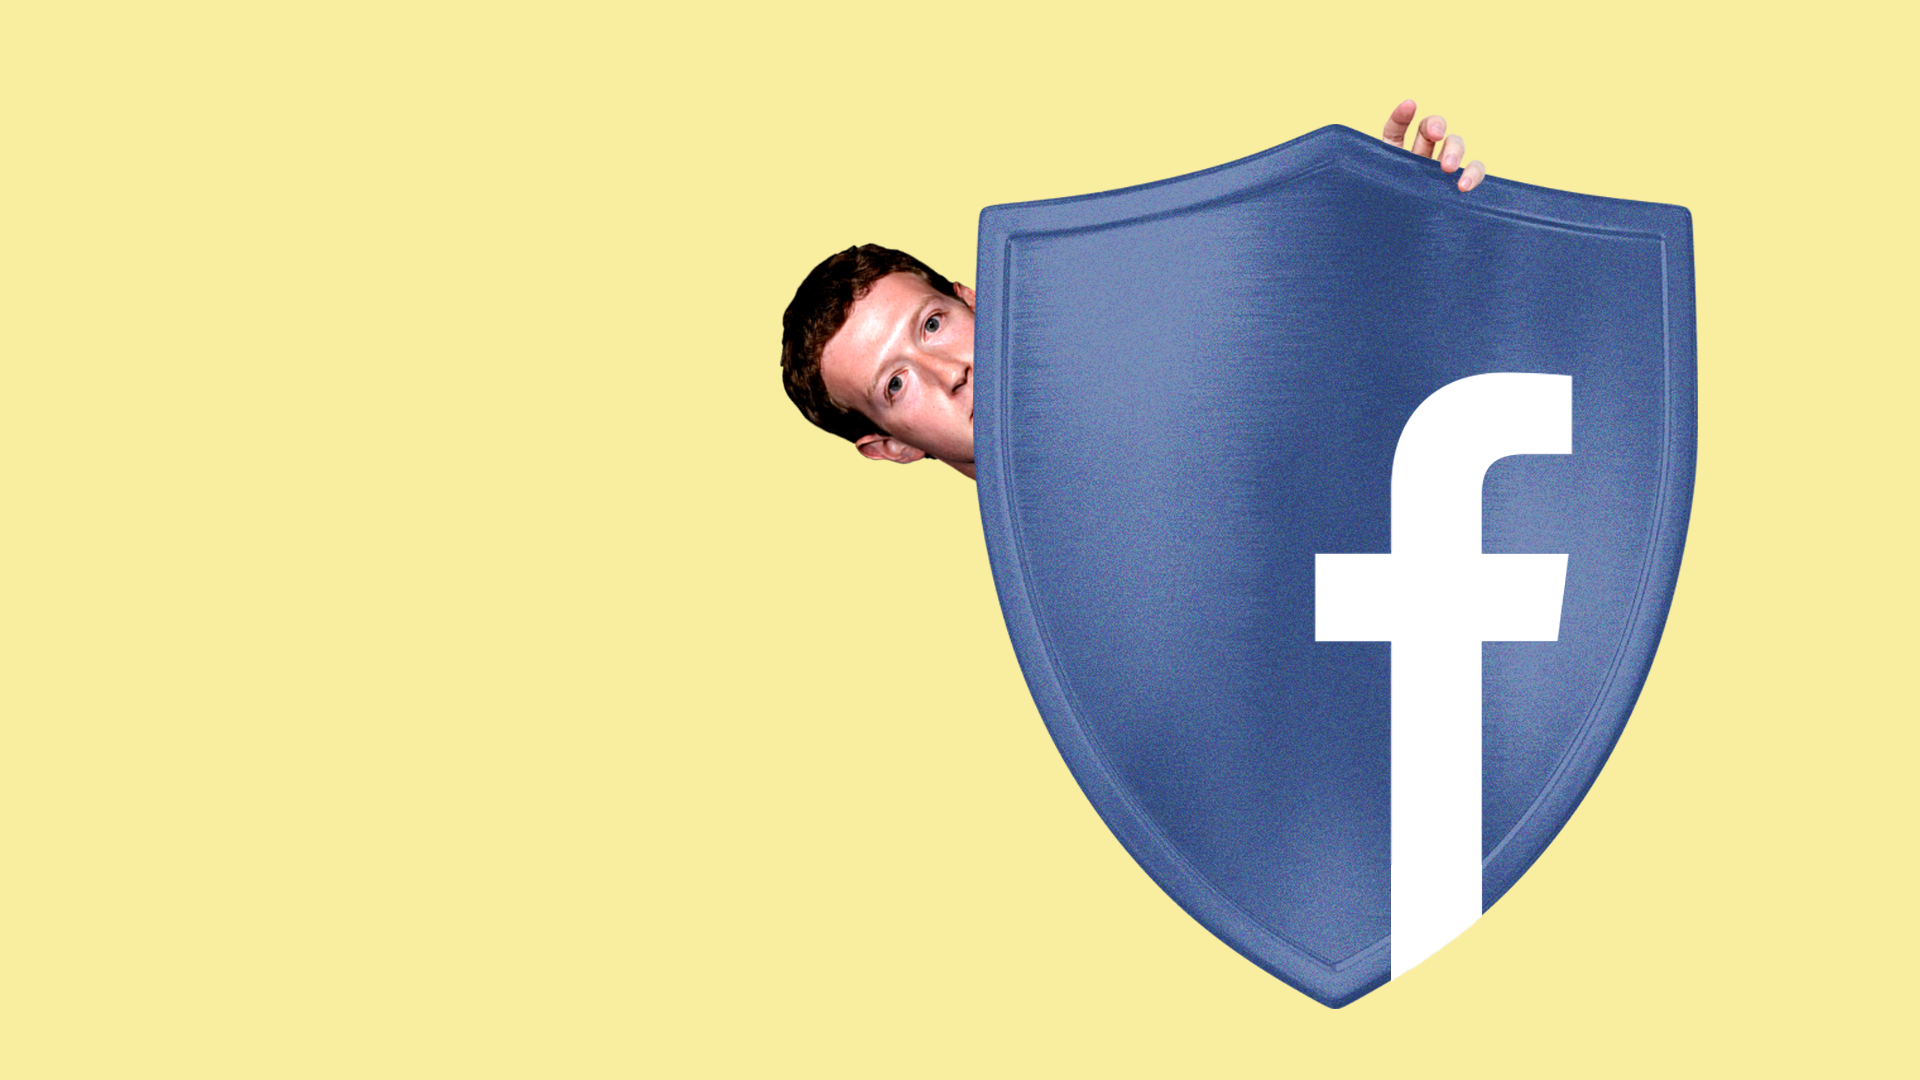 Illustration of Mark Zuckerberg hiding behind a shield with the Facebook logo on it